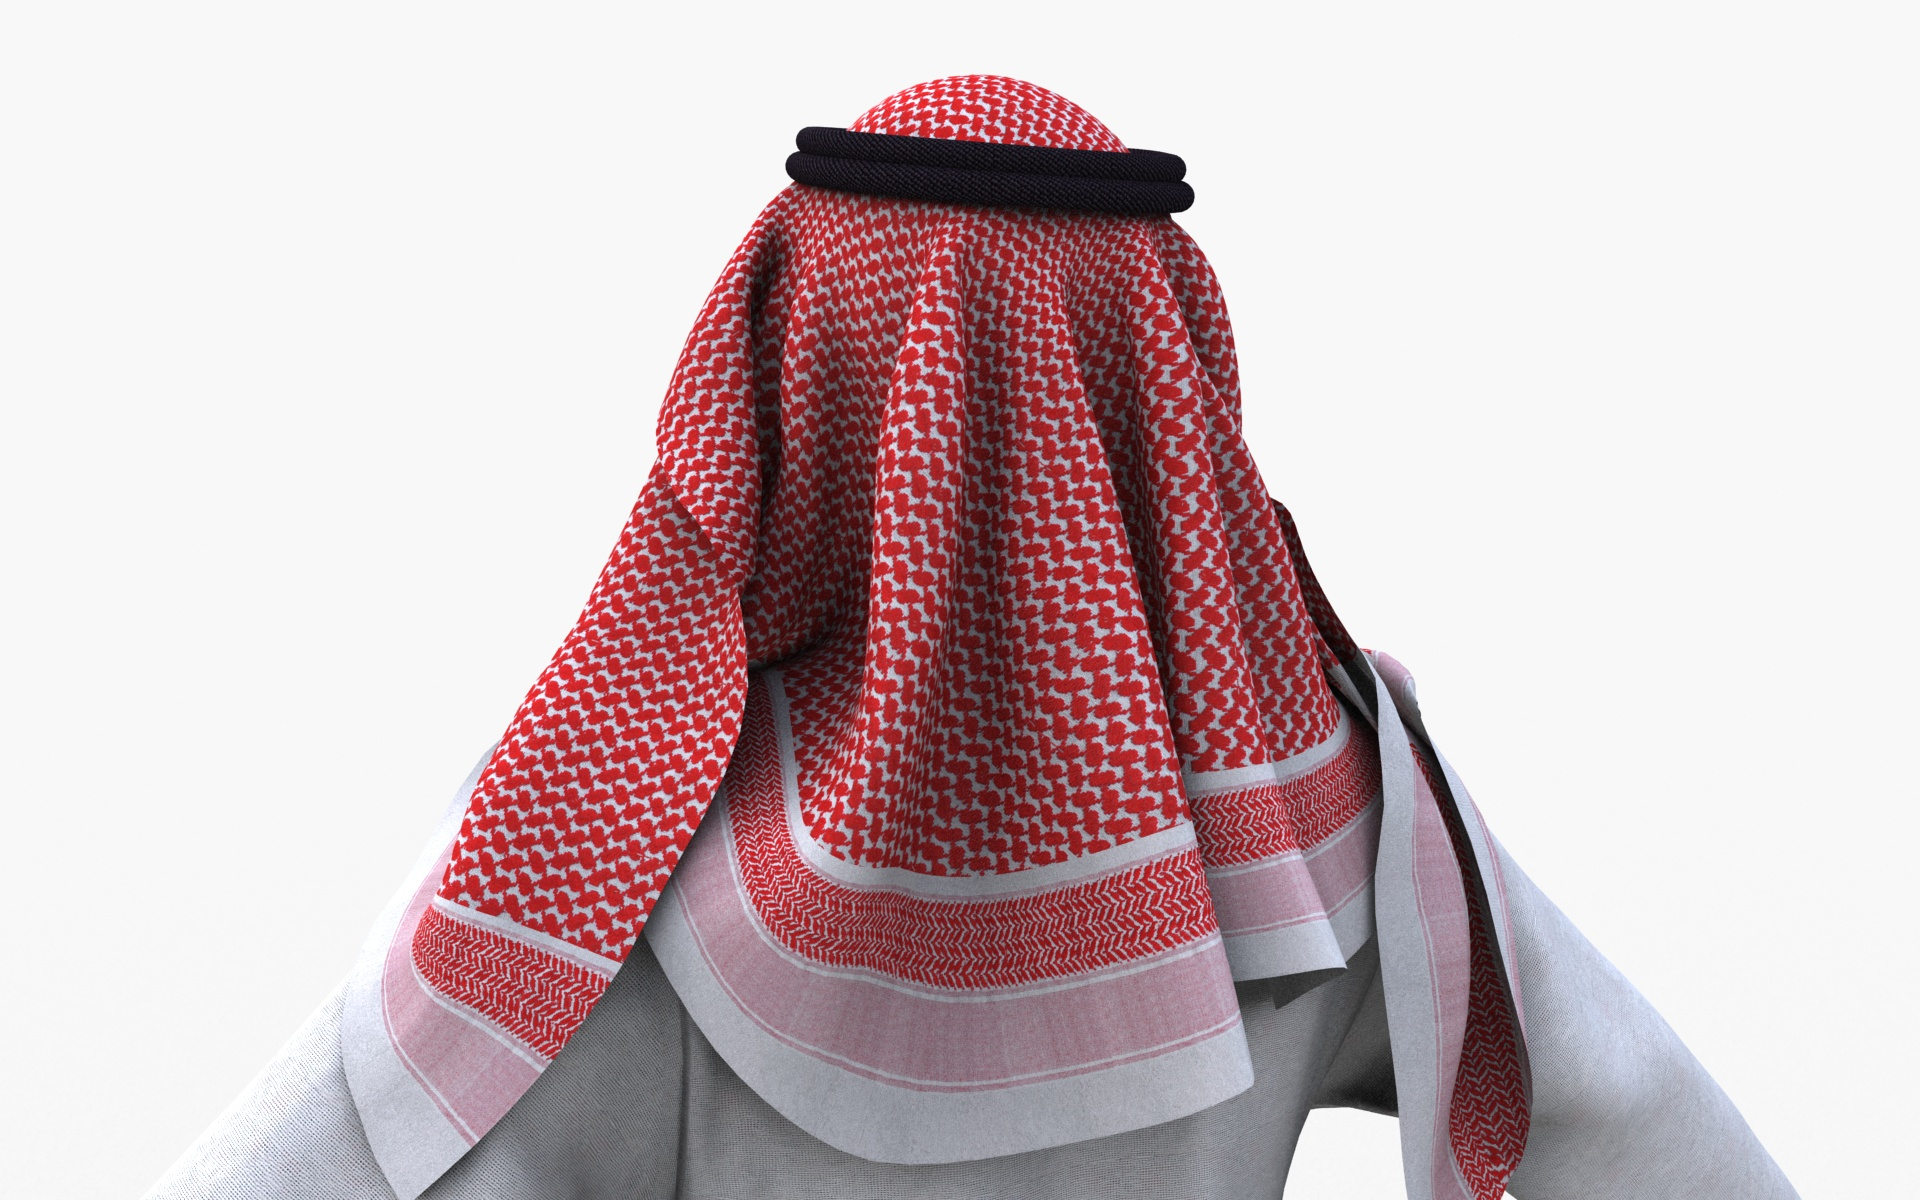 Middle east clothing man model - TurboSquid 1601736